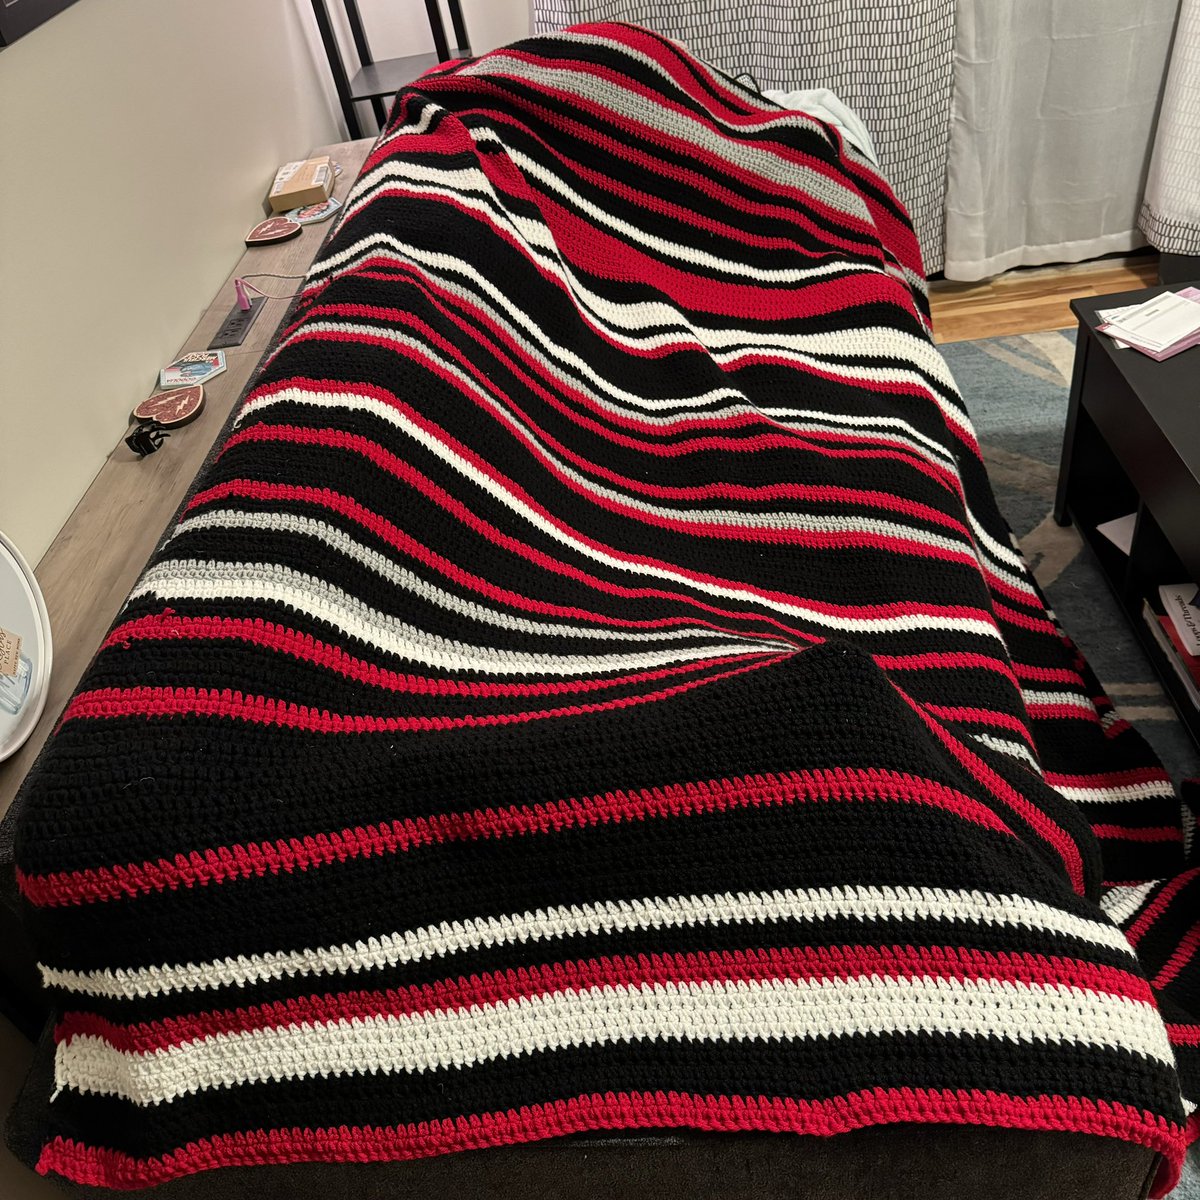 Well. I guess I have a new blanket. Black-win, silver-otw, red-loss, white-otl. #causechaos